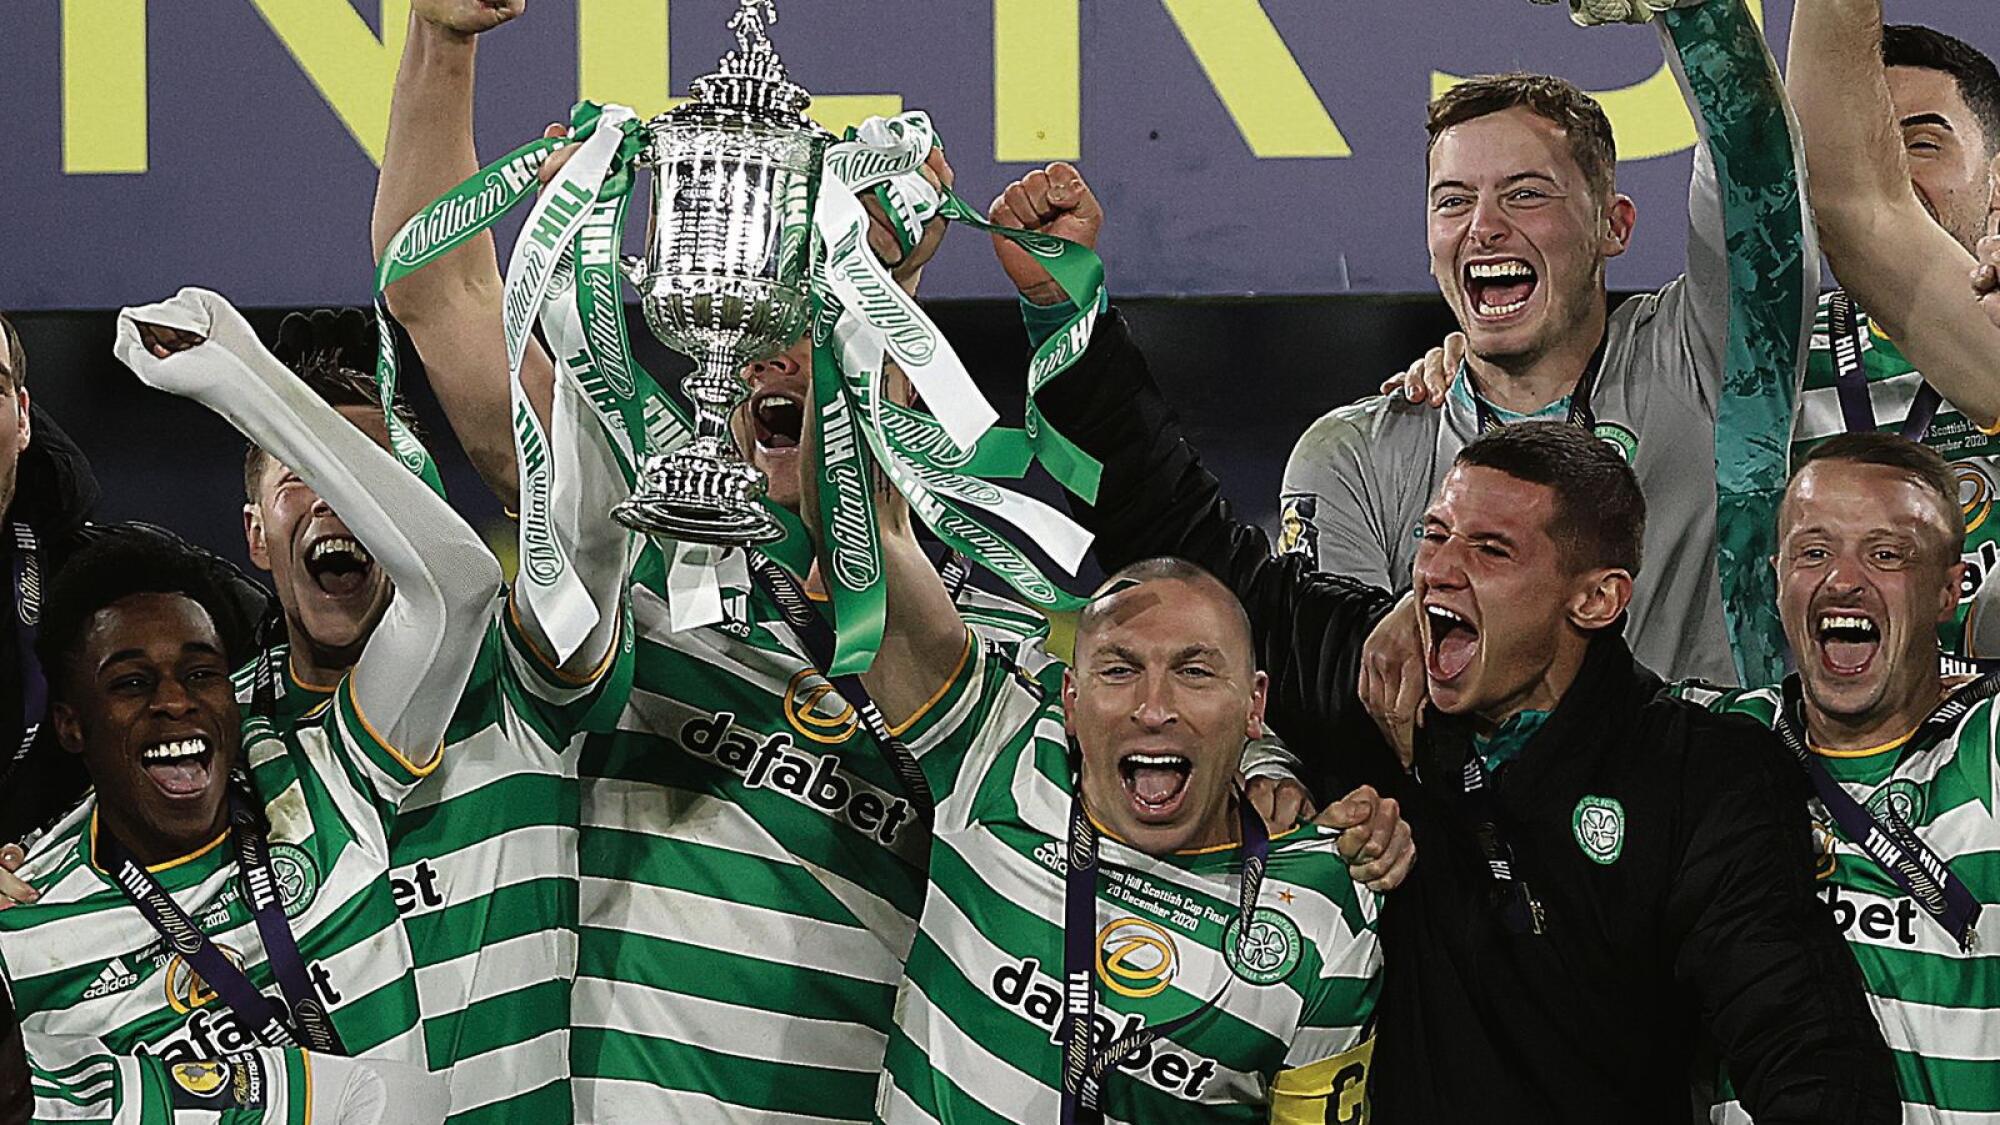 COVID-19: Scottish champions Celtic FC latest to impose pay cut on